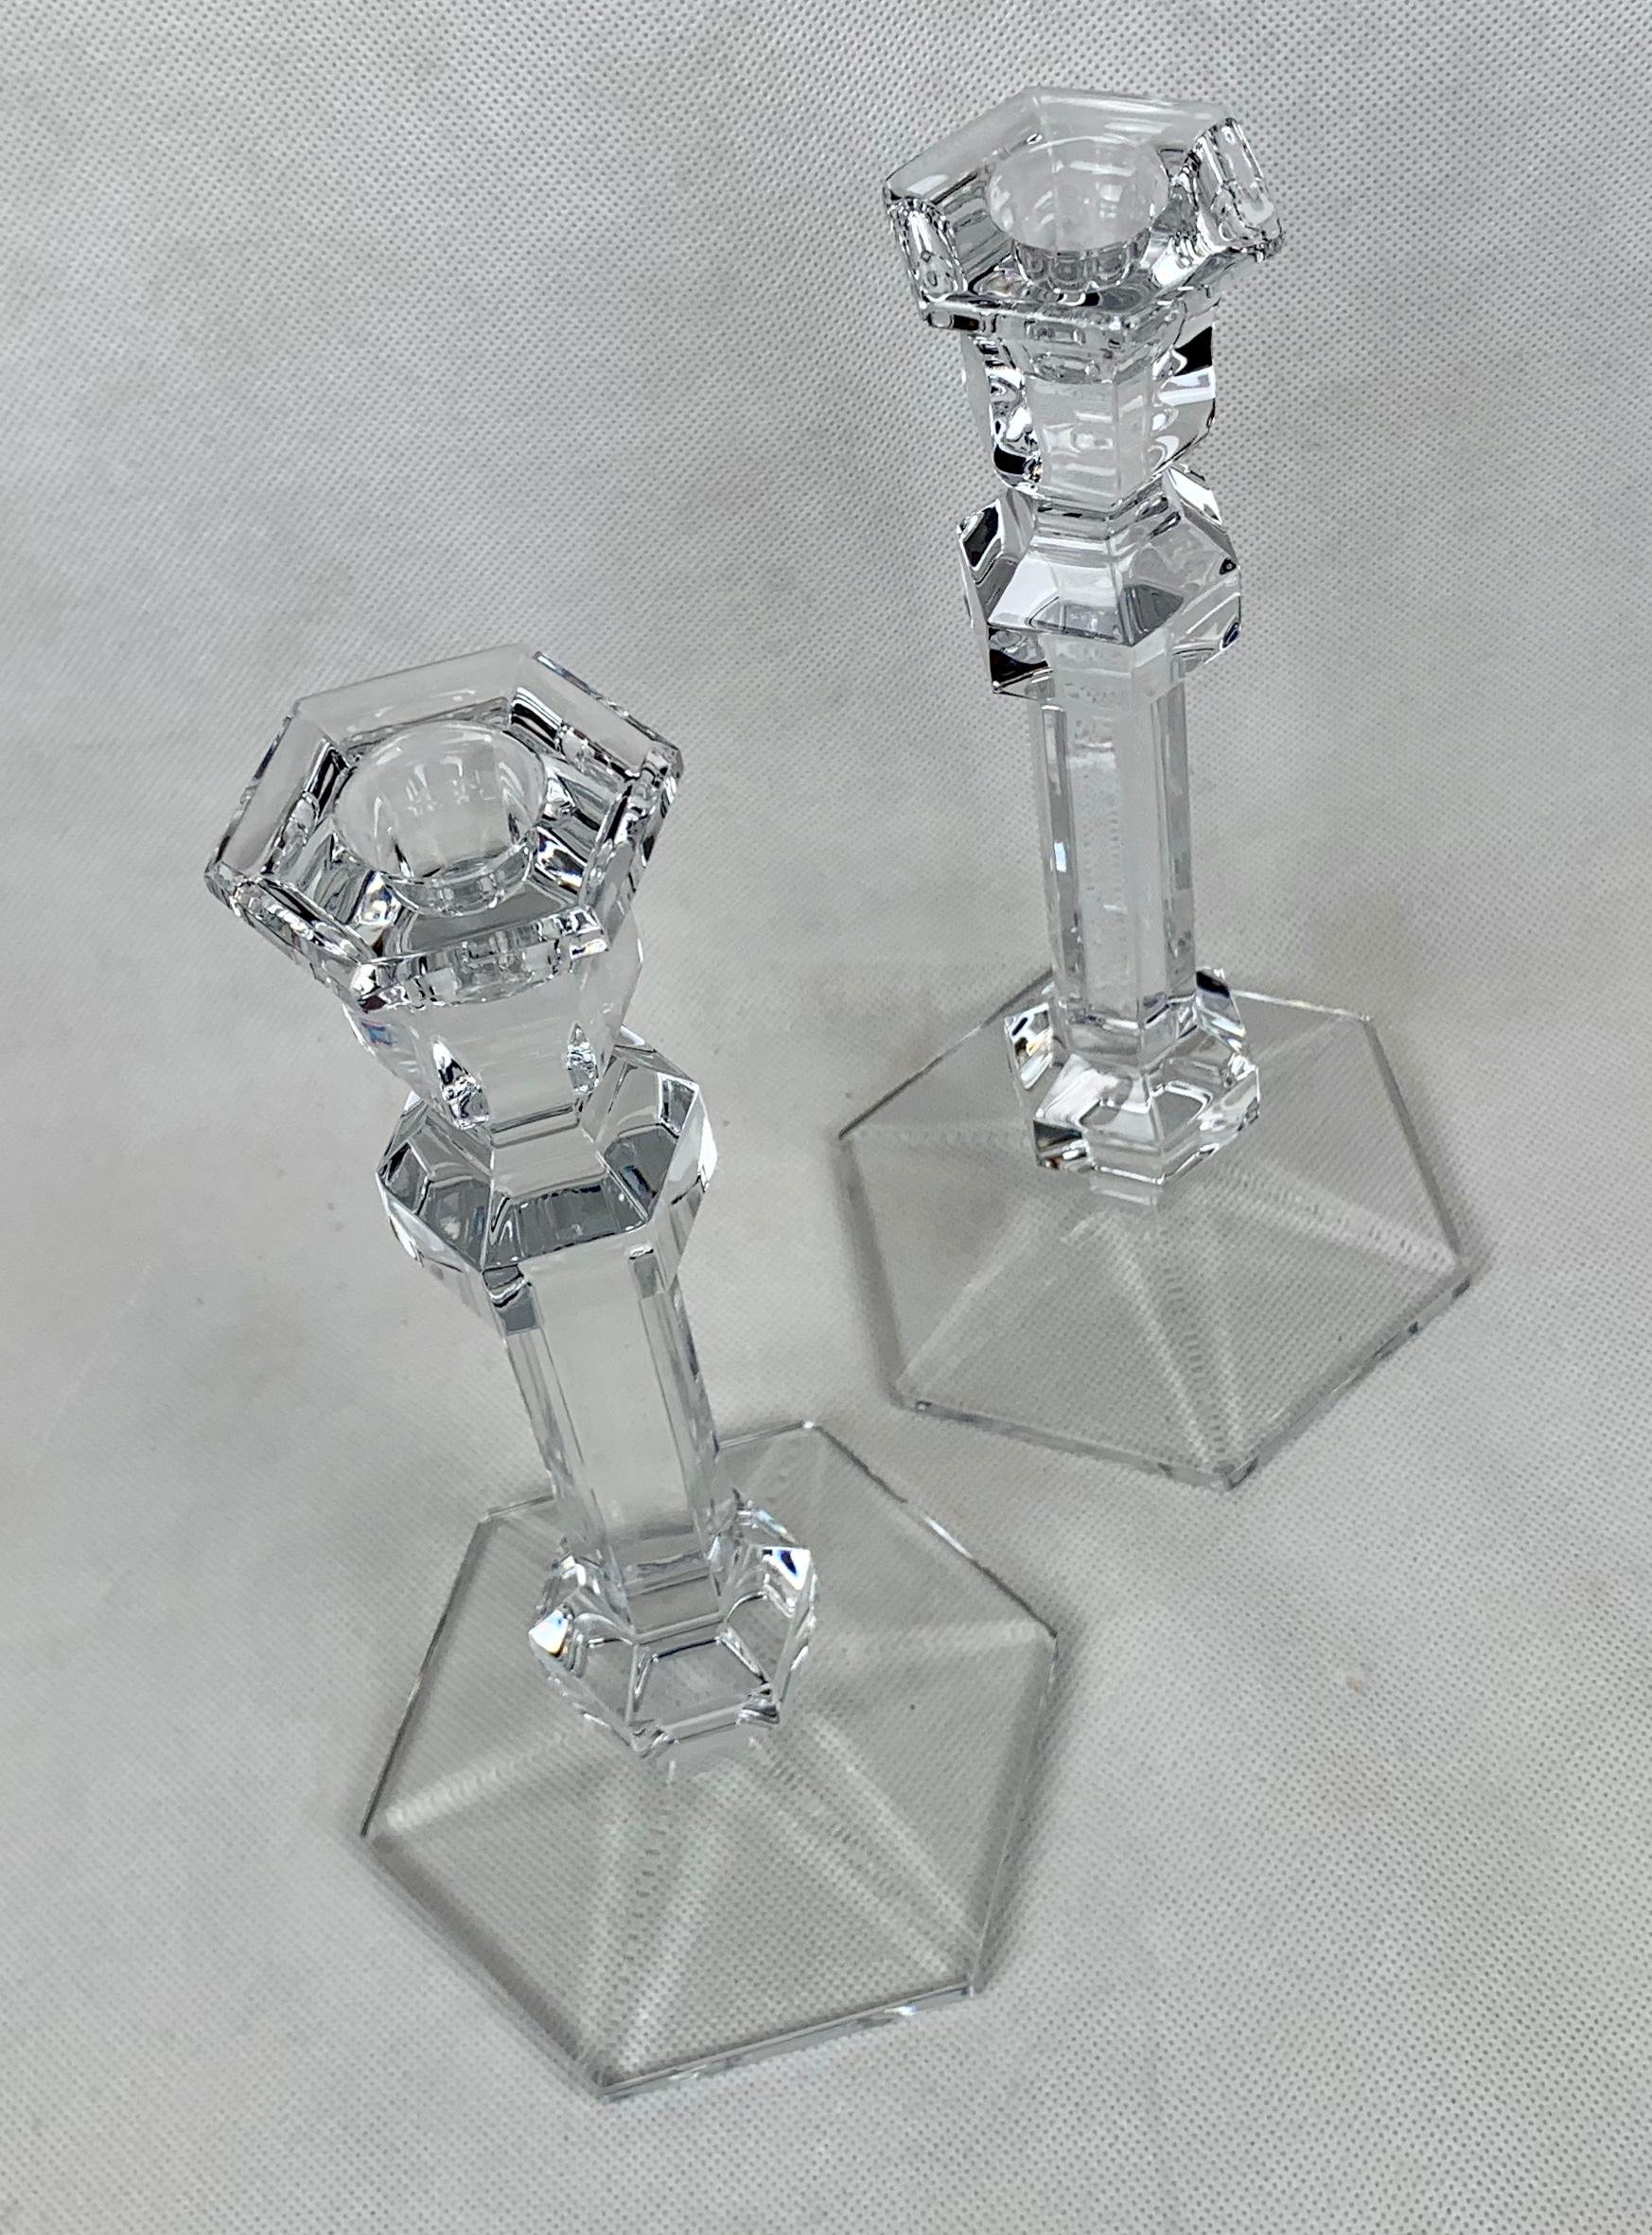 Original matched pair of clear crystal candlesticks in the Galatée pattern. Both candlesticks have the acid etched makers mark on the hexagonal base. Founded in 1826 Val St. Lambert became to Belgium what Baccarat became to France.
They received the